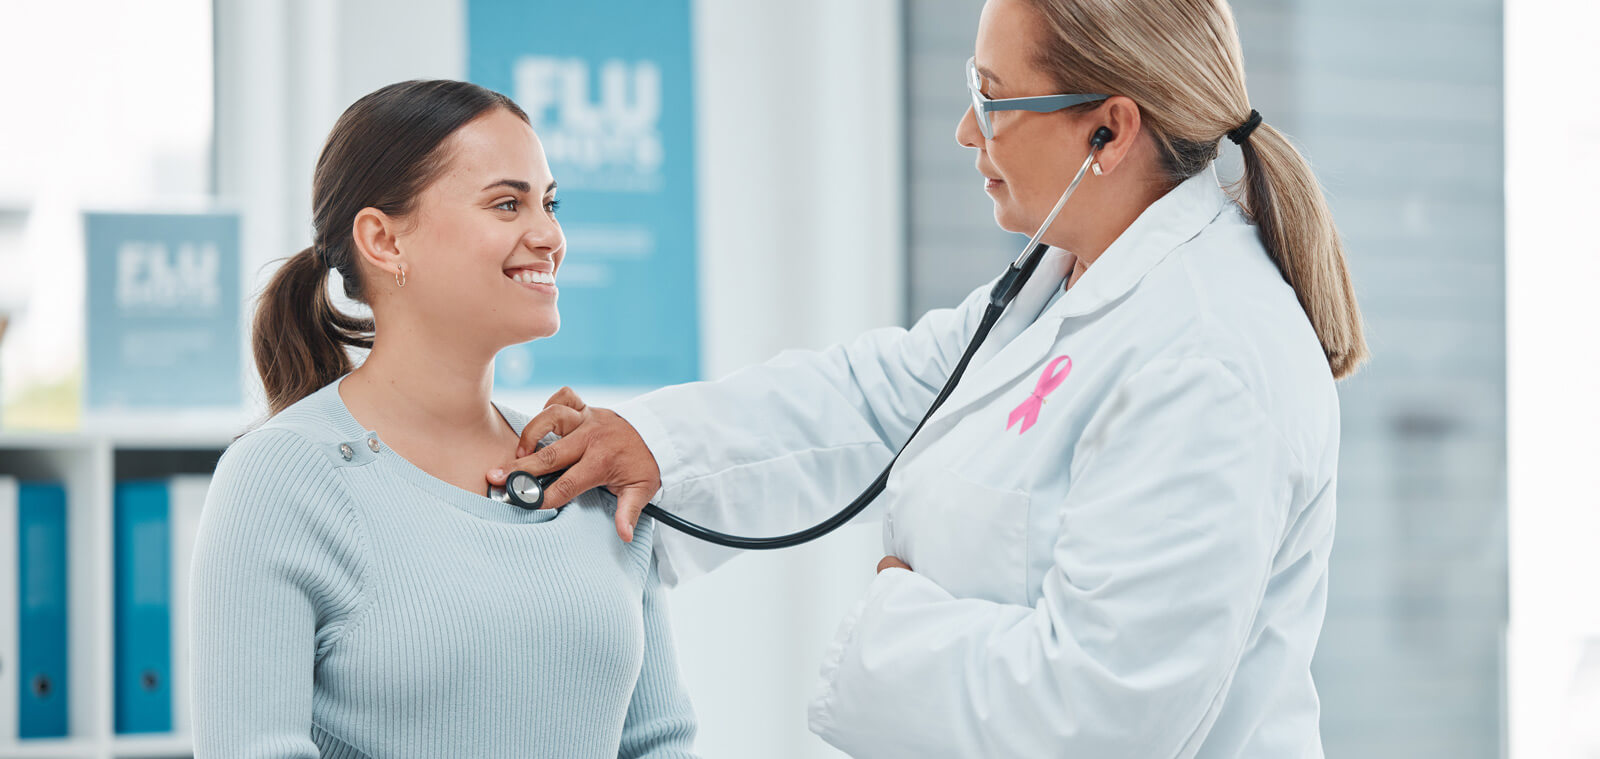 Medical provider using a stethoscope on a woman.